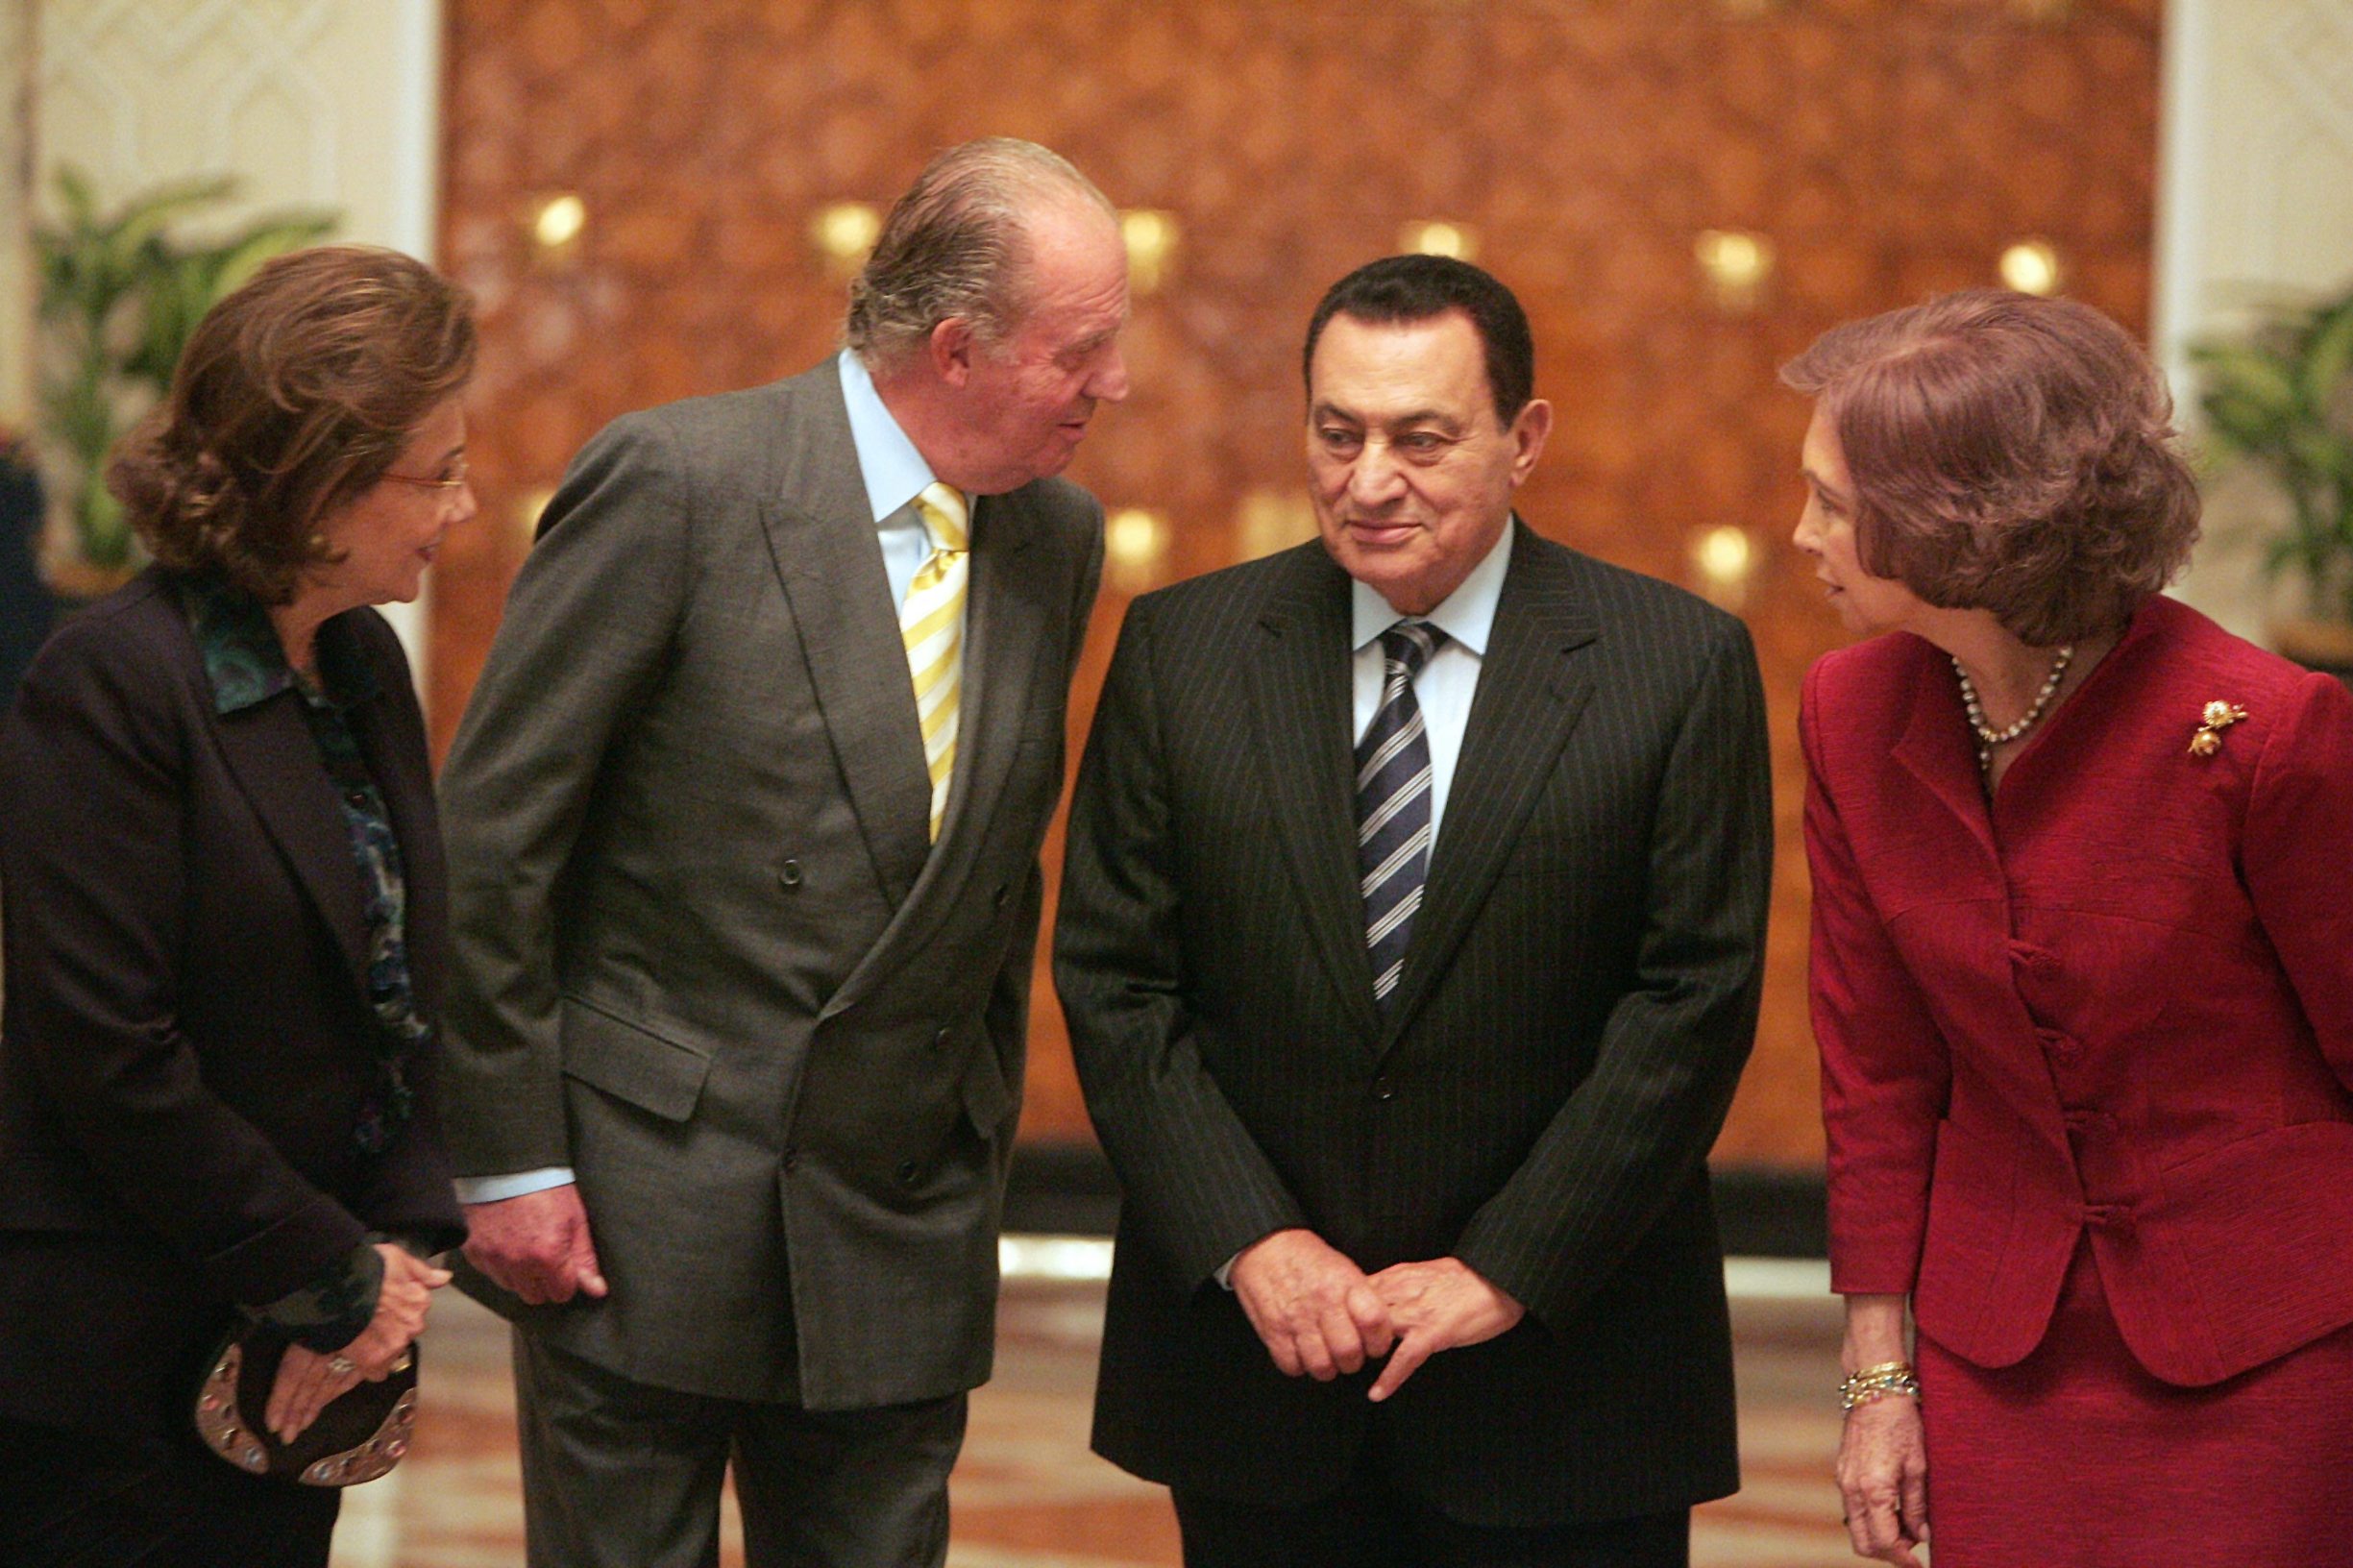 (FILES) A file photo taken on February 05, 2008 shows King of Spain Juan Carlos (2nd L) speaking with Egyptian President Hosni Mubarak (2nd R) as Spain's Queen Sofia (L) and Egypt's first lady Suzanne Mubarak look on at the presidential palace in Cairo. - Egypt's former long-time president Hosni Mubarak died on February 25, 2020, at the age 91 at Cairo's Galaa military hospital, his brother-in-law General Mounir Thabet told AFP. (Photo by Khaled DESOUKI / AFP)